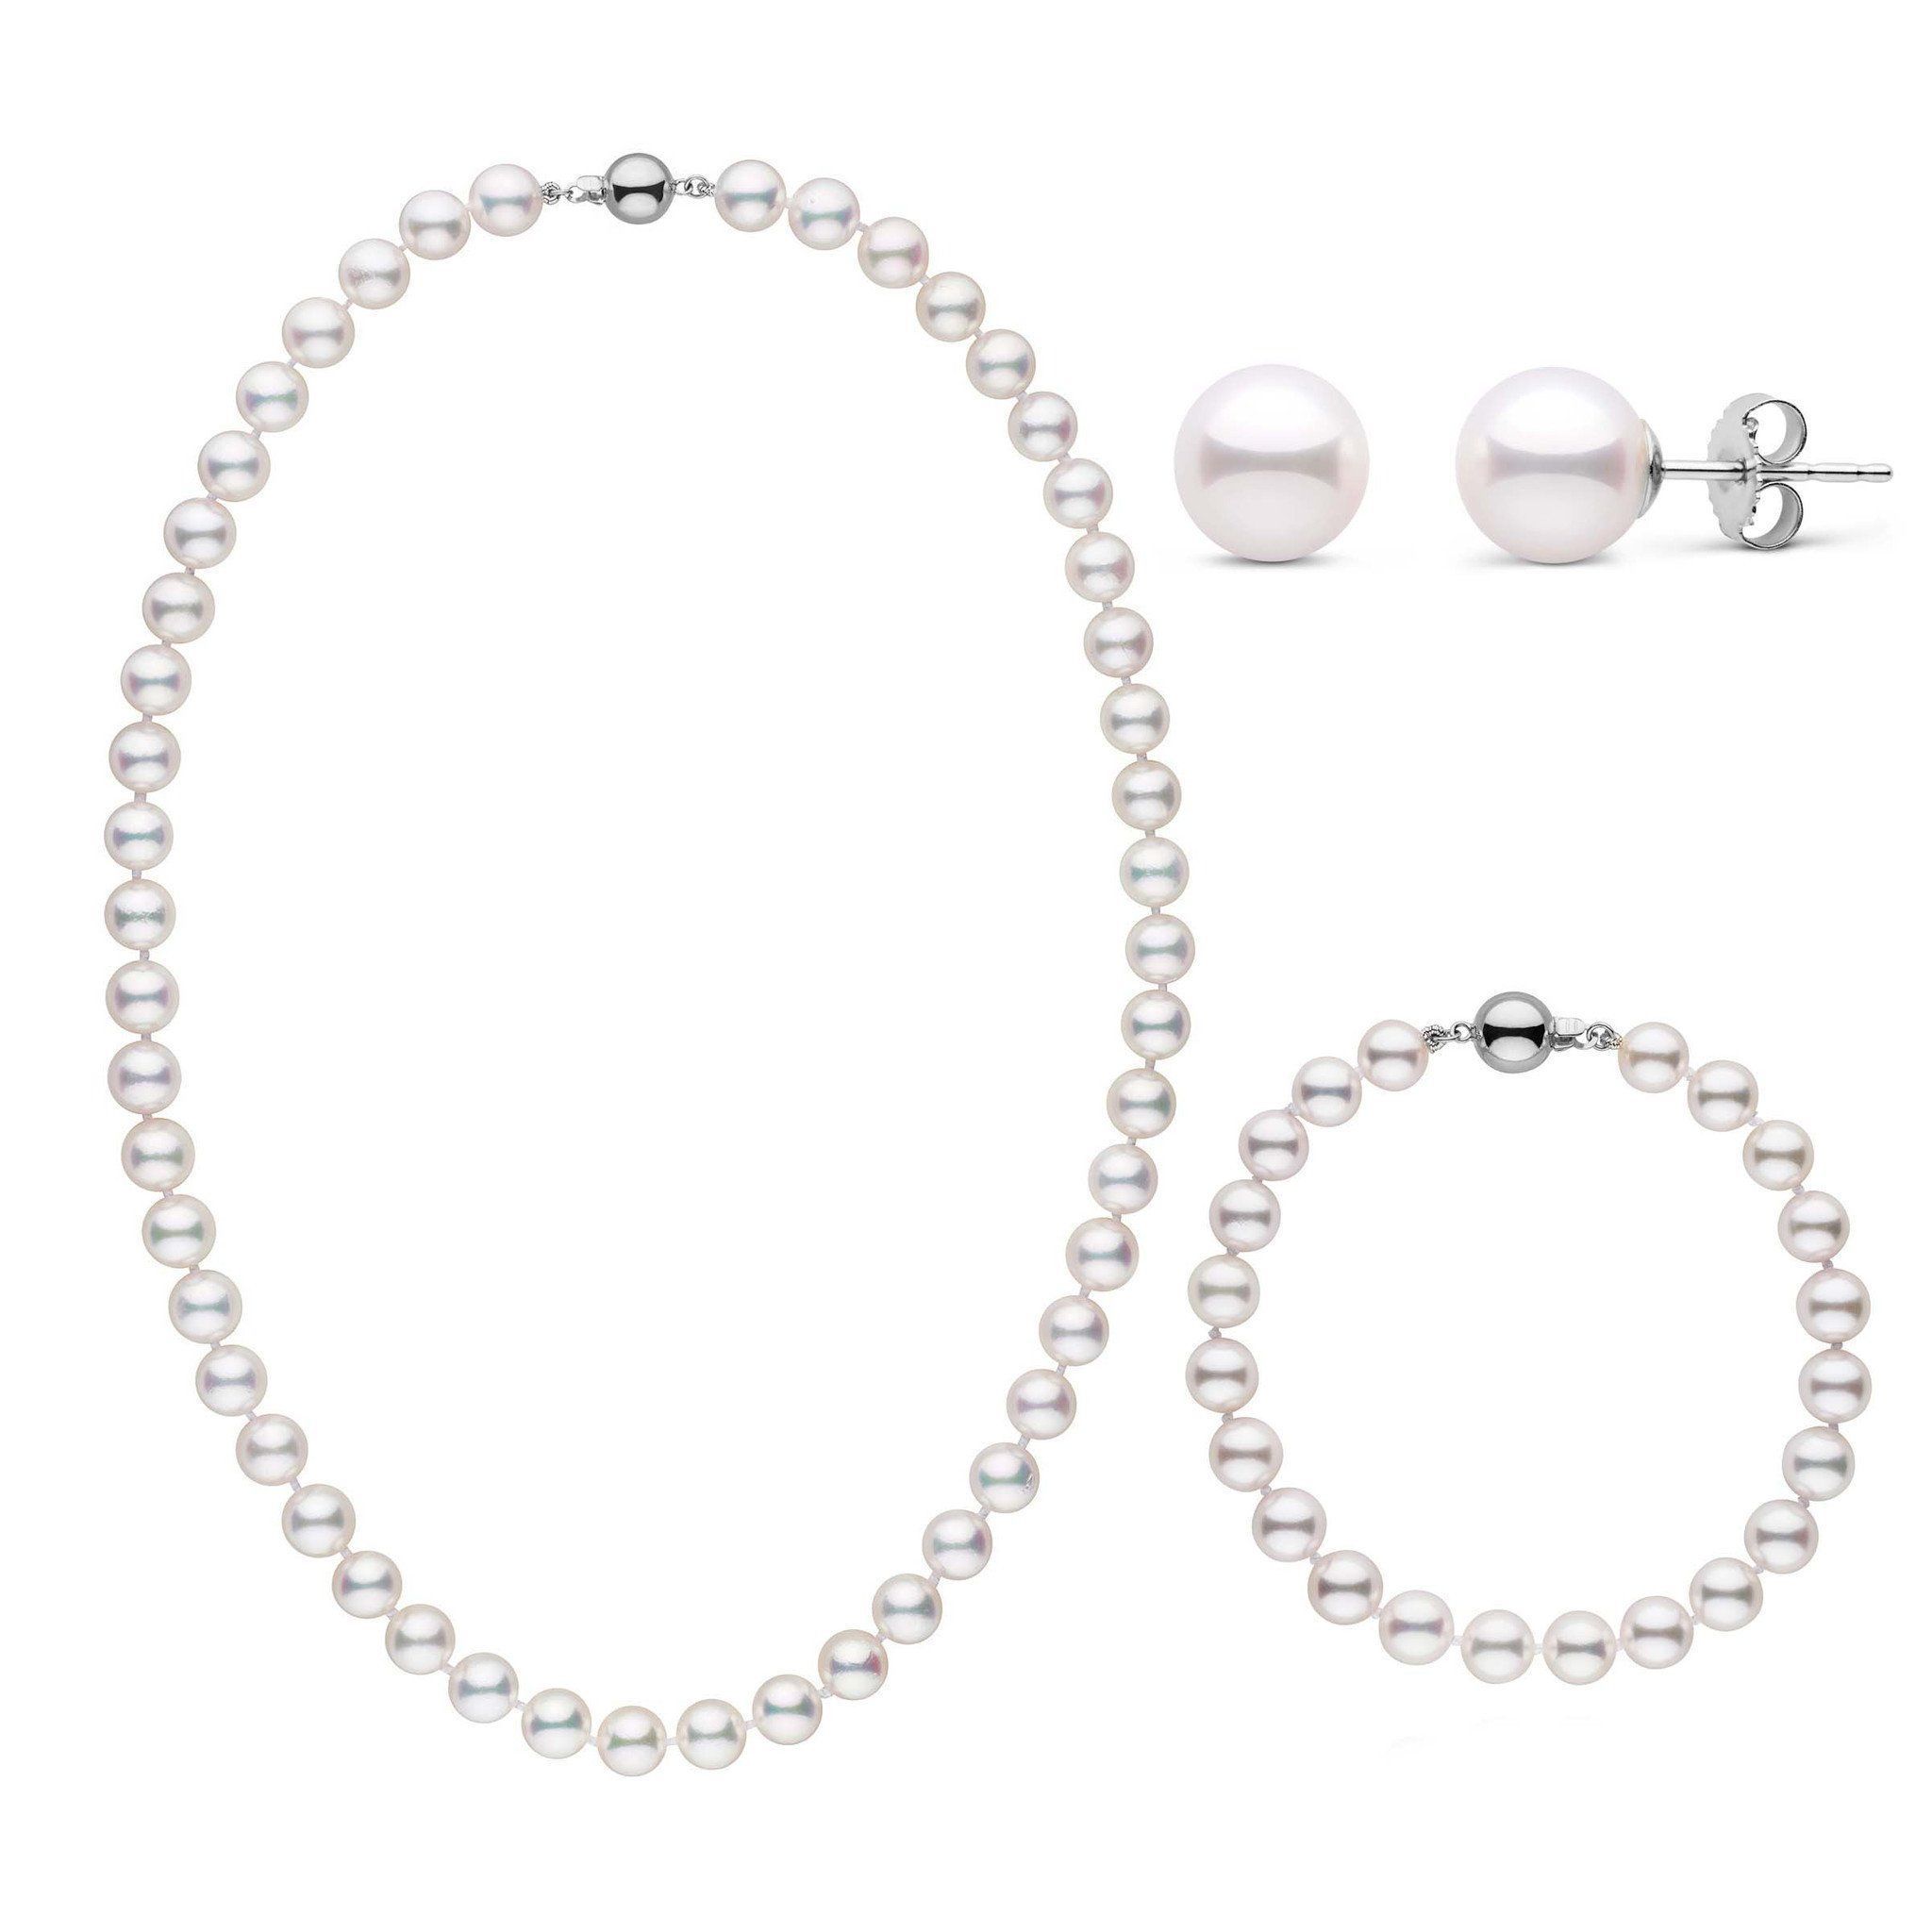 18 Inch 3 Piece Set of 7.0-7.5 mm AAA White Akoya Pearls